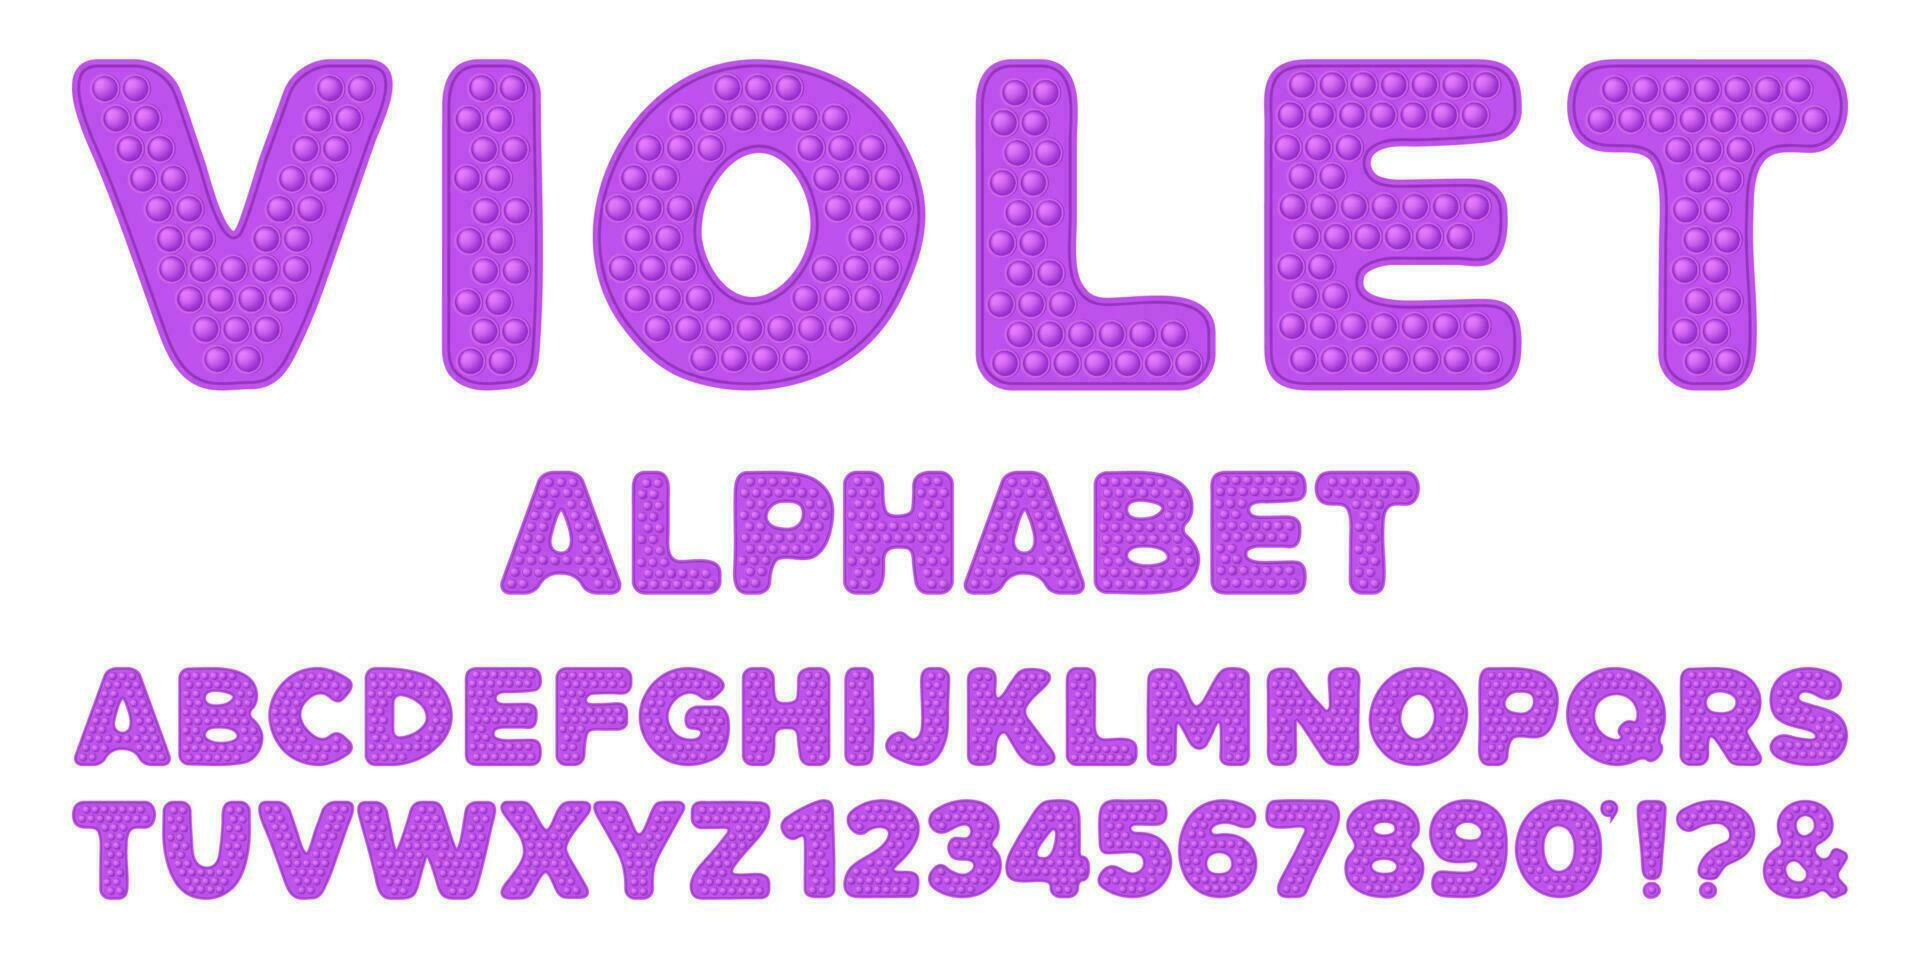 Popping toy font design - violet alphabet and numbers set in style of trendy silicon fidget toys in bright colors. Bubble sensory letters. Isolated cartoon vector illustration.